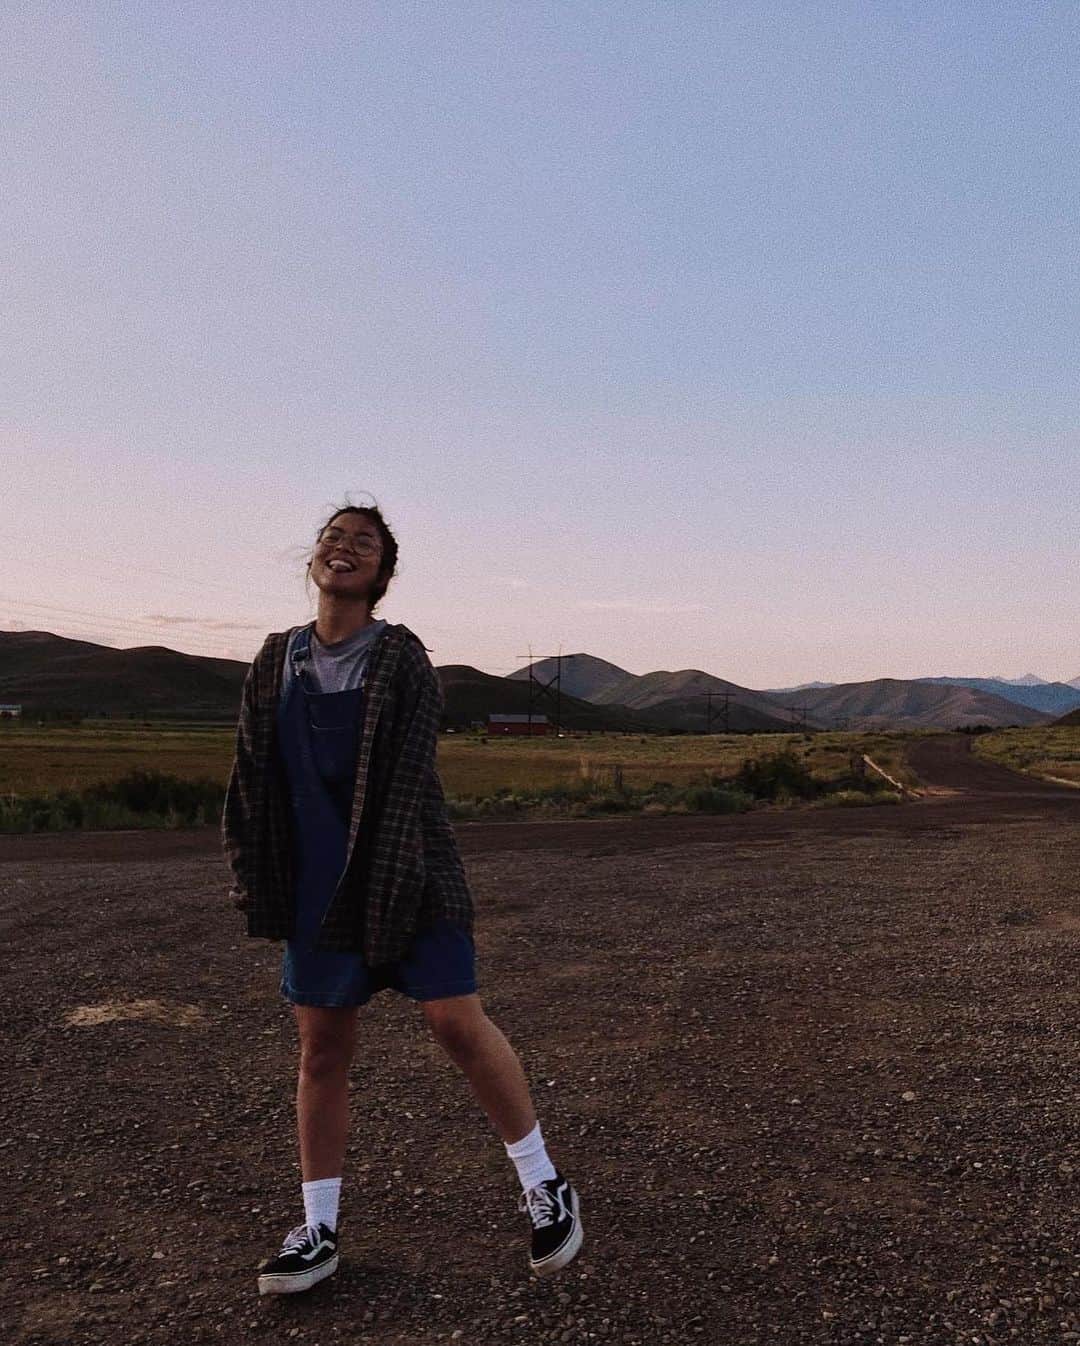 パイパー・カーダのインスタグラム：「been road tripping for the past three weeks (by myself, wearing a mask always, etc) and there are a myriad of things i could say about the waterfalls in oregon or the mountains in washington or the wildflowers in wyoming (they were lit), but i’ll spare you the melodrama. i already knew this experience was a result of my privilege (i have a car, i have money to spend on lodging, i have parents that are cool with me dropping off the grid for a bit), but i got hit with another learning curve upon realizing my privilege had a whole other layer to it.  when i first started making travel plans, i wanted to camp everywhere since it’s cheaper and generally more fun but quickly had to nix the idea when i looked at the facts: i am a small, young woman traveling by herself and also axe murderers exist. i briefly lamented not being able to travel the way i wanted because of things about myself that i can not change. it was sobering to realize that Black people experience this EVERY TIME they travel regardless of the minutiae of the trip.  @cam__alejandra (who wrote the text in these slides) has been an especially helpful resource for learning about realities of the Black experience like this. her posts and stories offer ways for you to reflect on your own work/life, suggestions for how to continue sustainable activism in our lives and on our feeds, and showcases companies and brands that are or aren’t actually practicing true allyship. highly suggest giving her (and the other accounts i’ve posted about previously) a follow. her travel experiences are far more important than mine.」